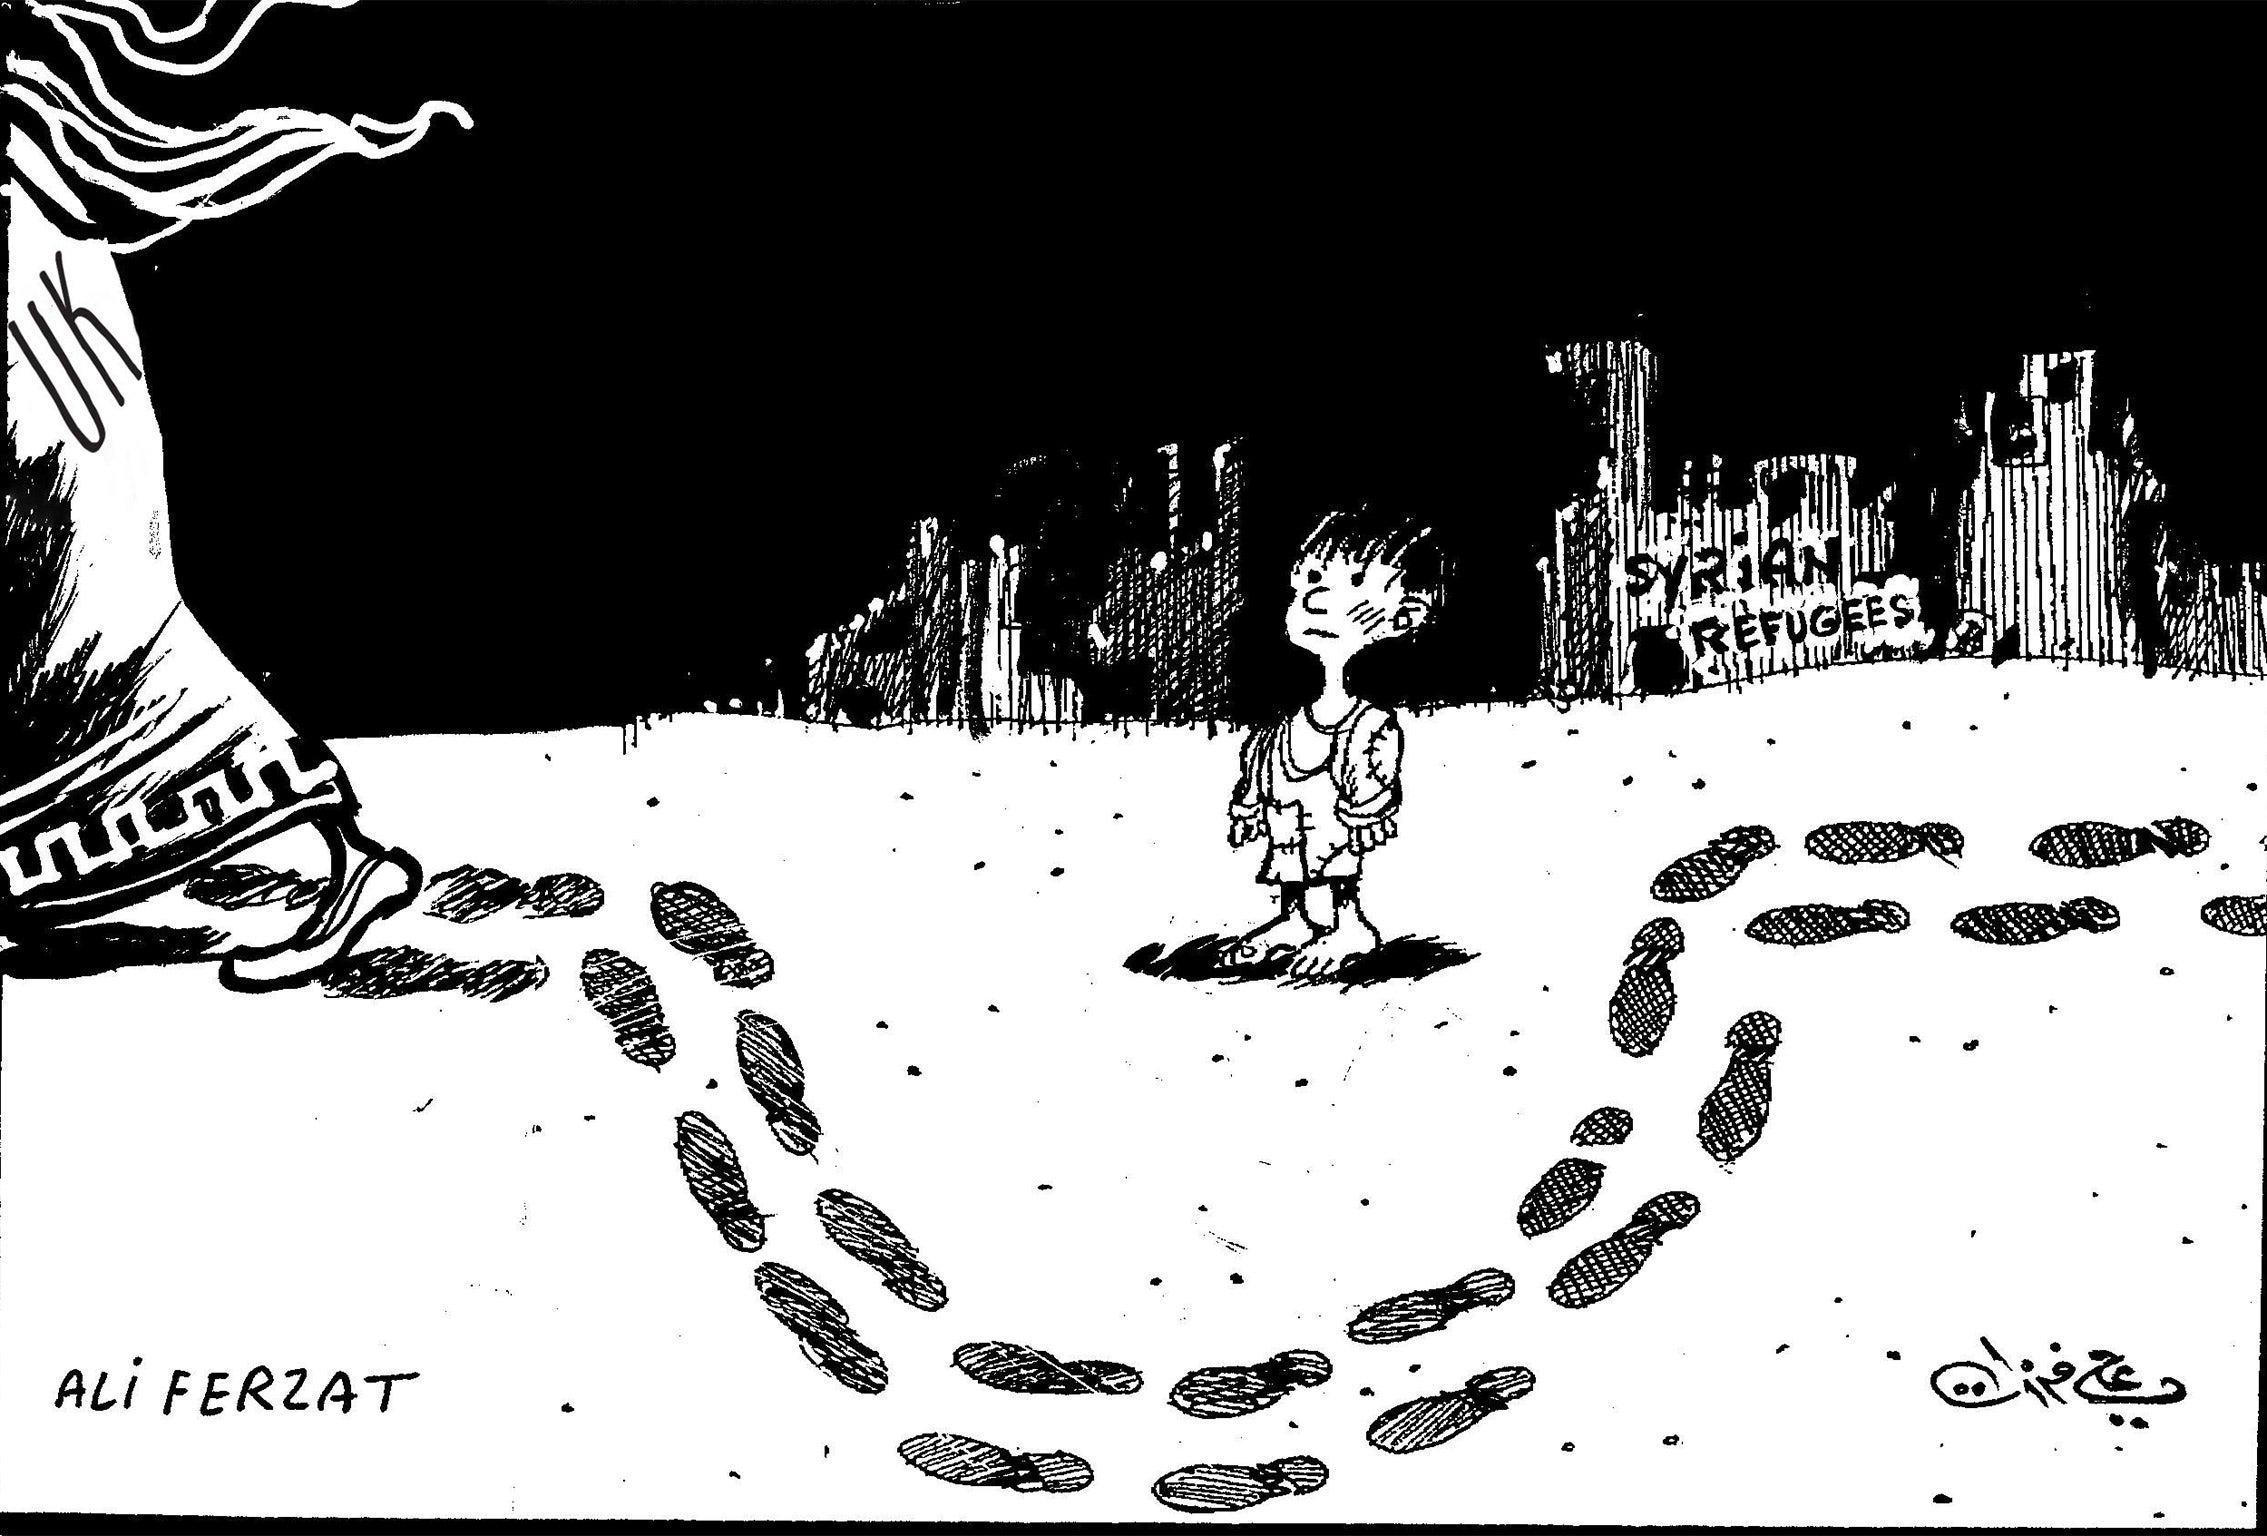 The cartoon depicts the UK (far left) walking around a Syrian child refugee